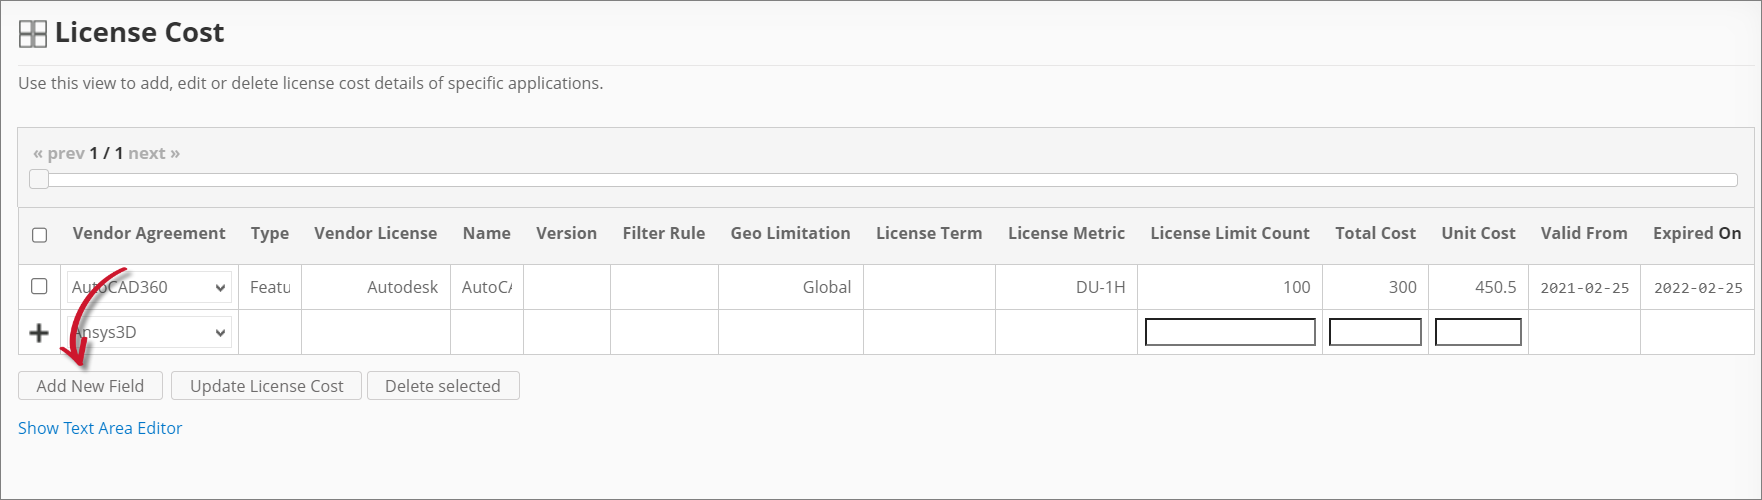 Analysis Server License Cost: Adding a New Field